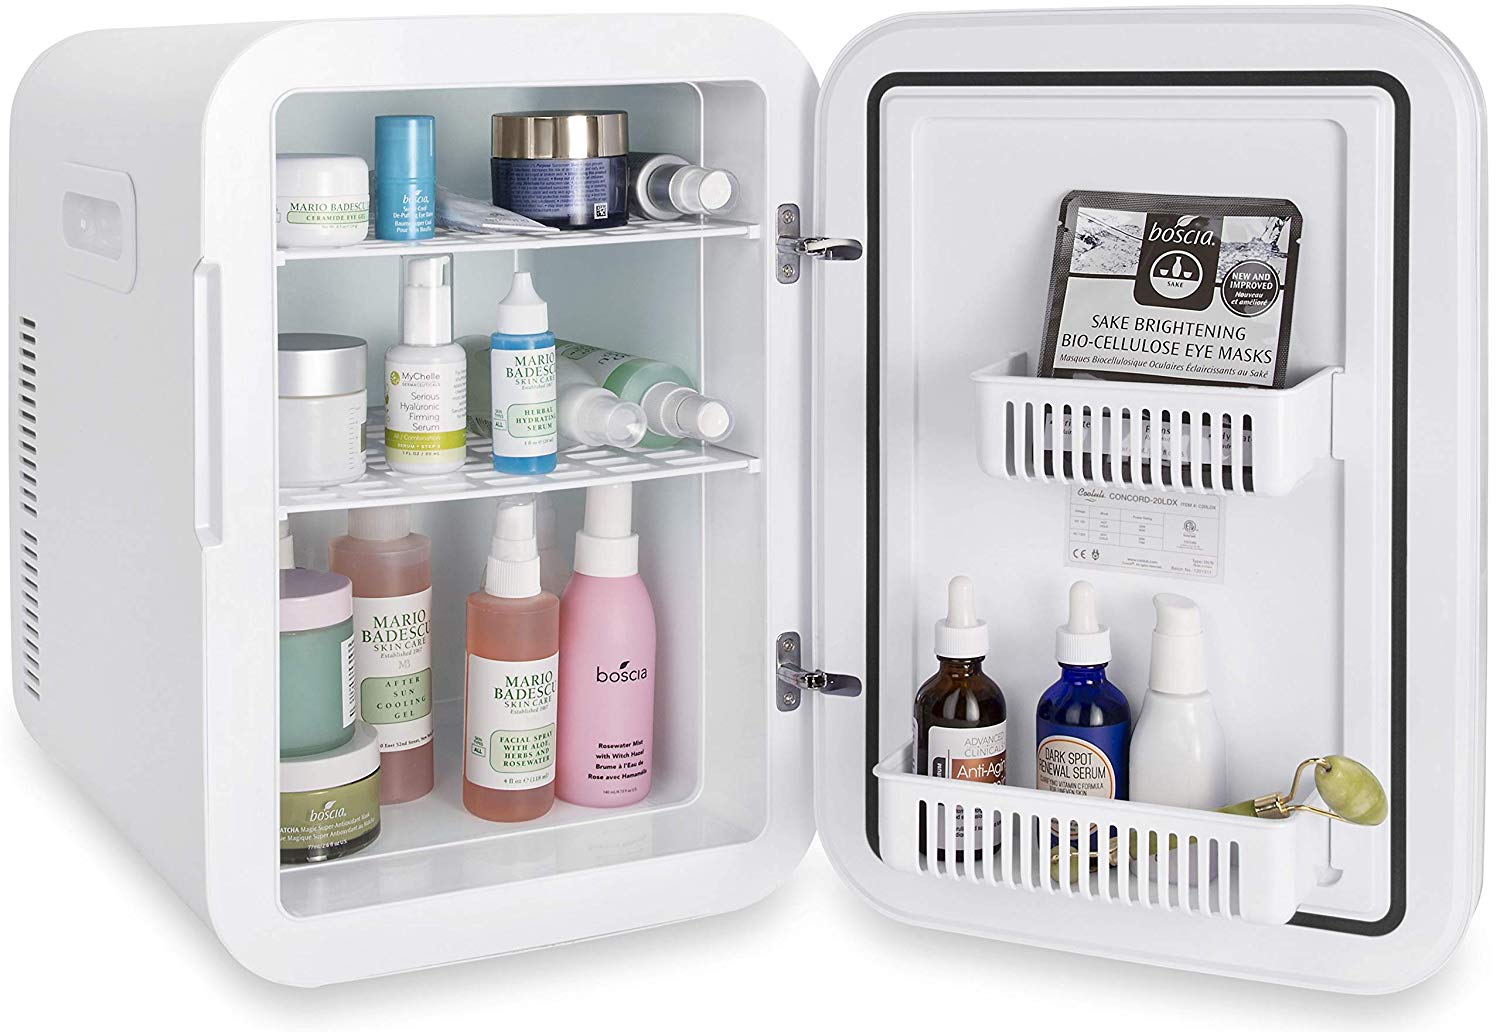 What's the Deal with People Putting Skincare Products in Mini-Fridges